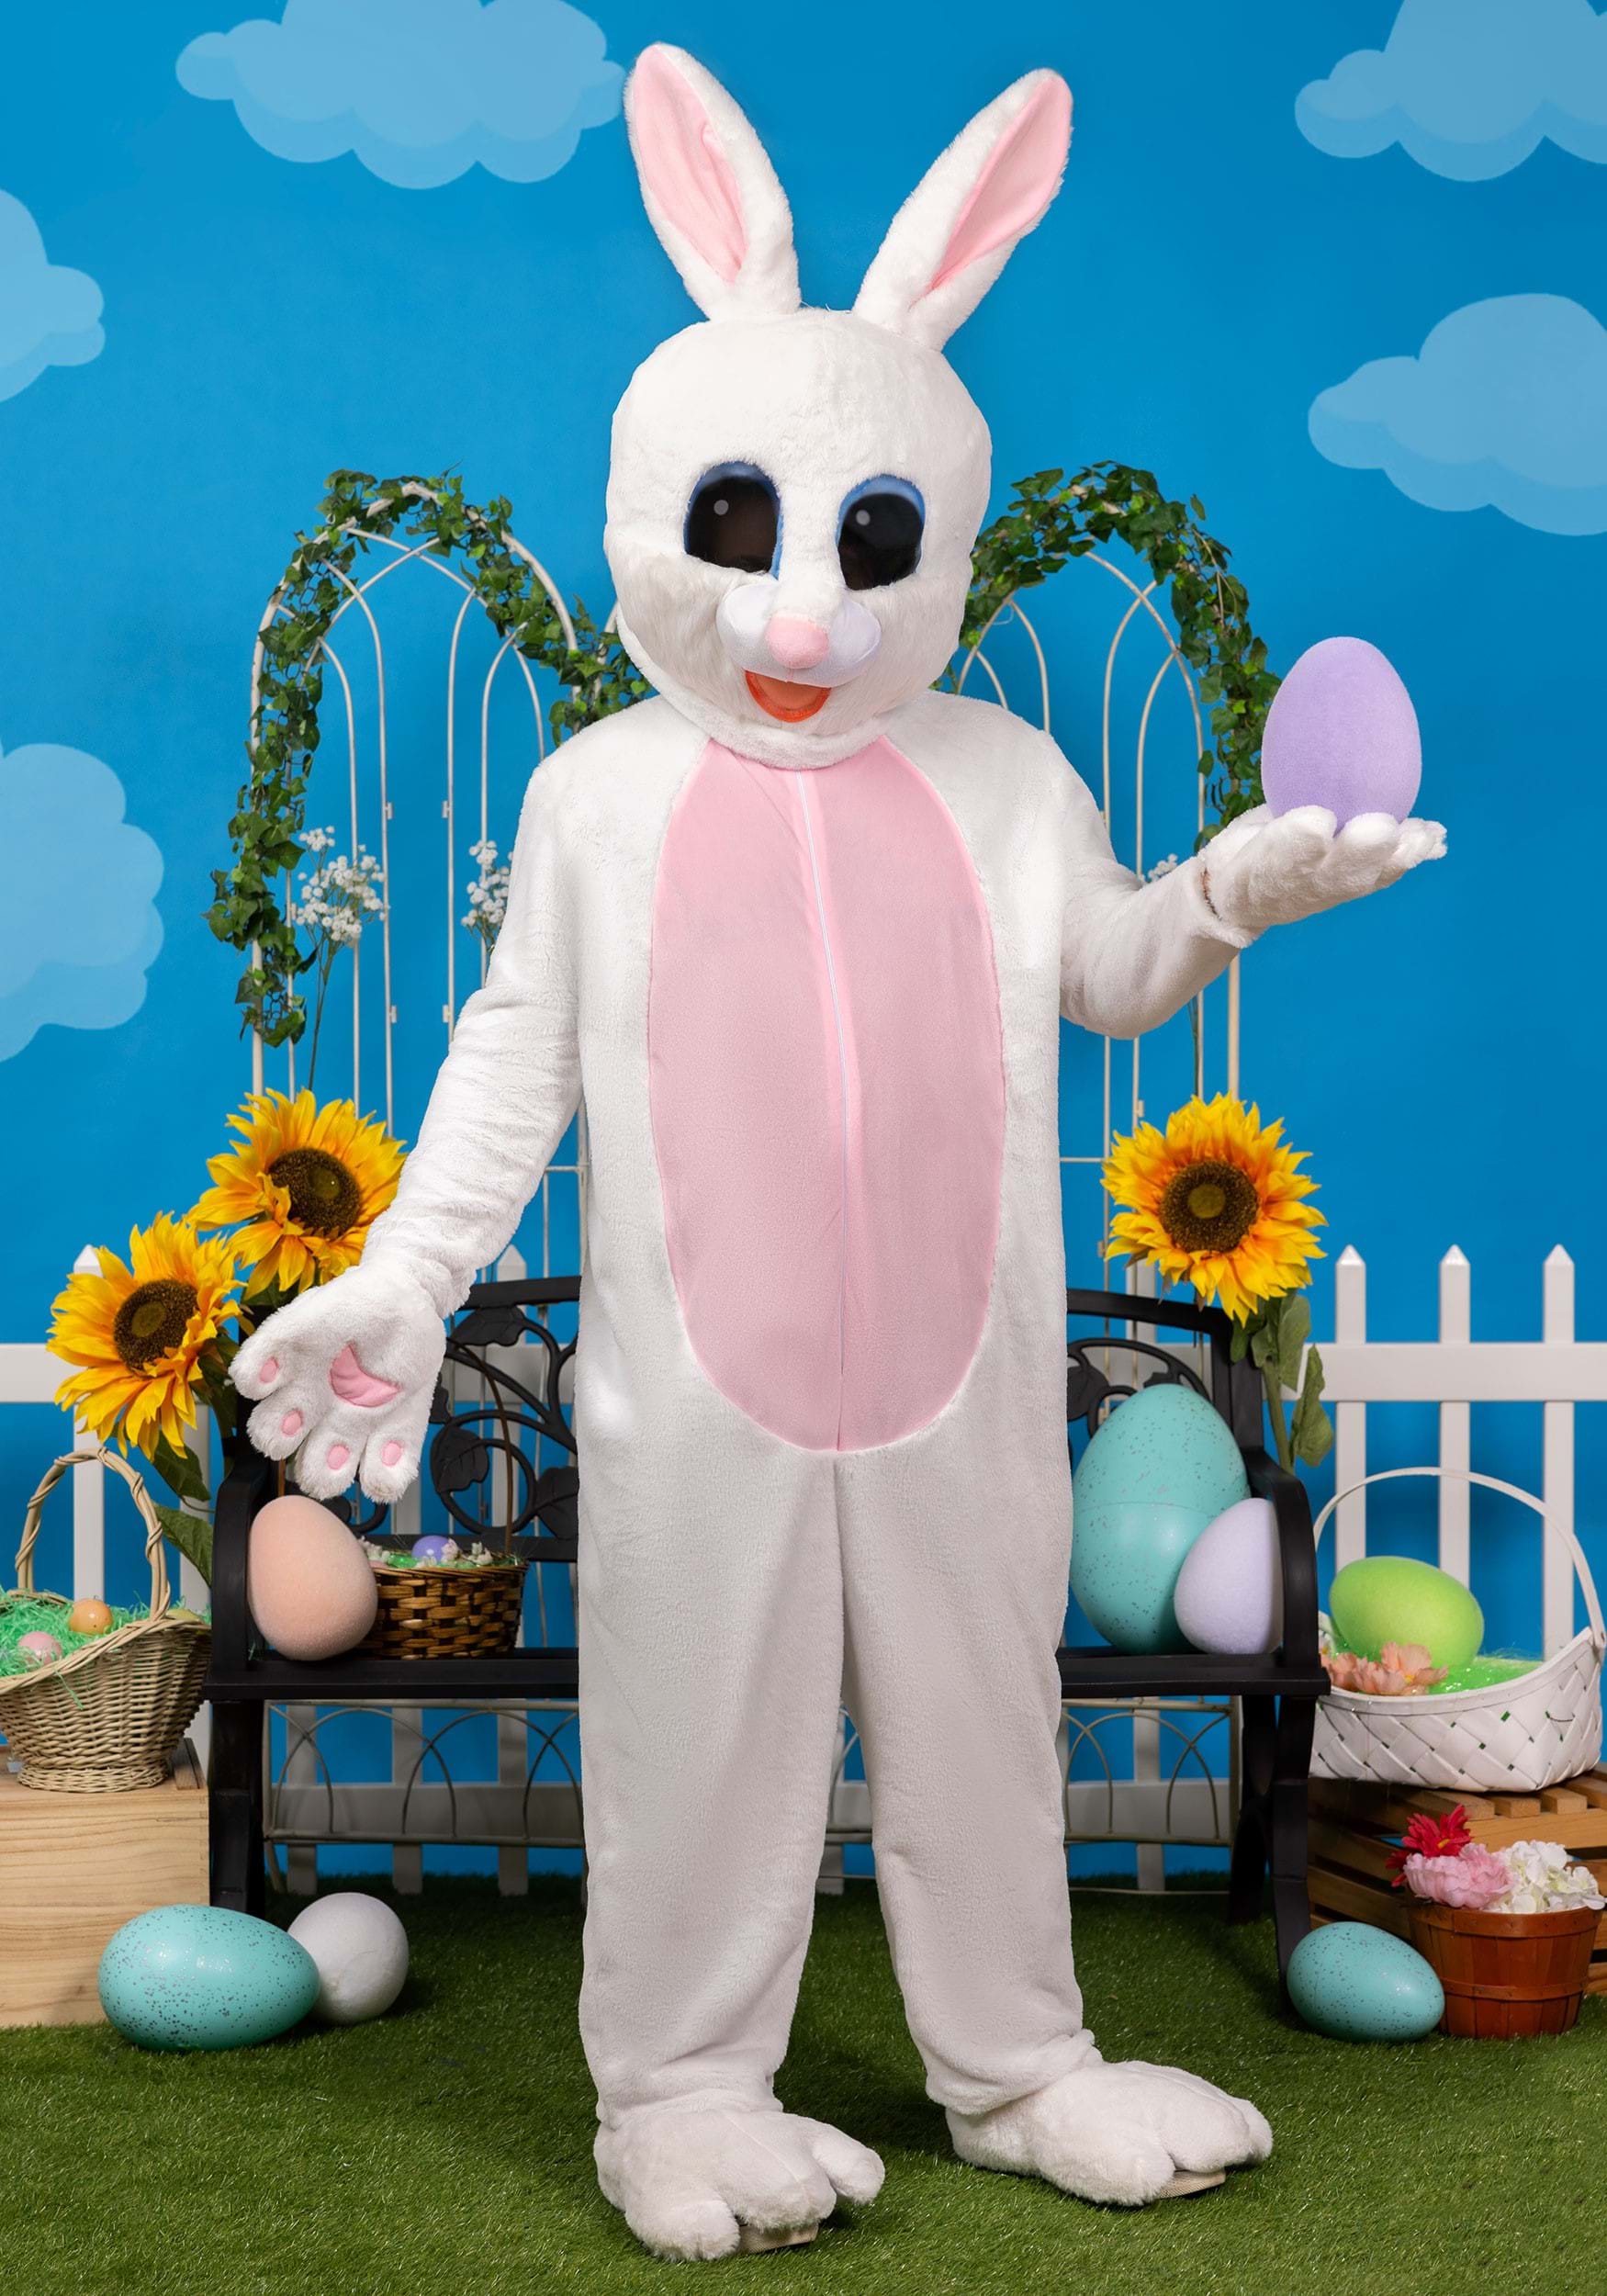 https://images.halloween.com/products/53930/1-1/plus-size-mascot-easter-bunny-costume.jpg